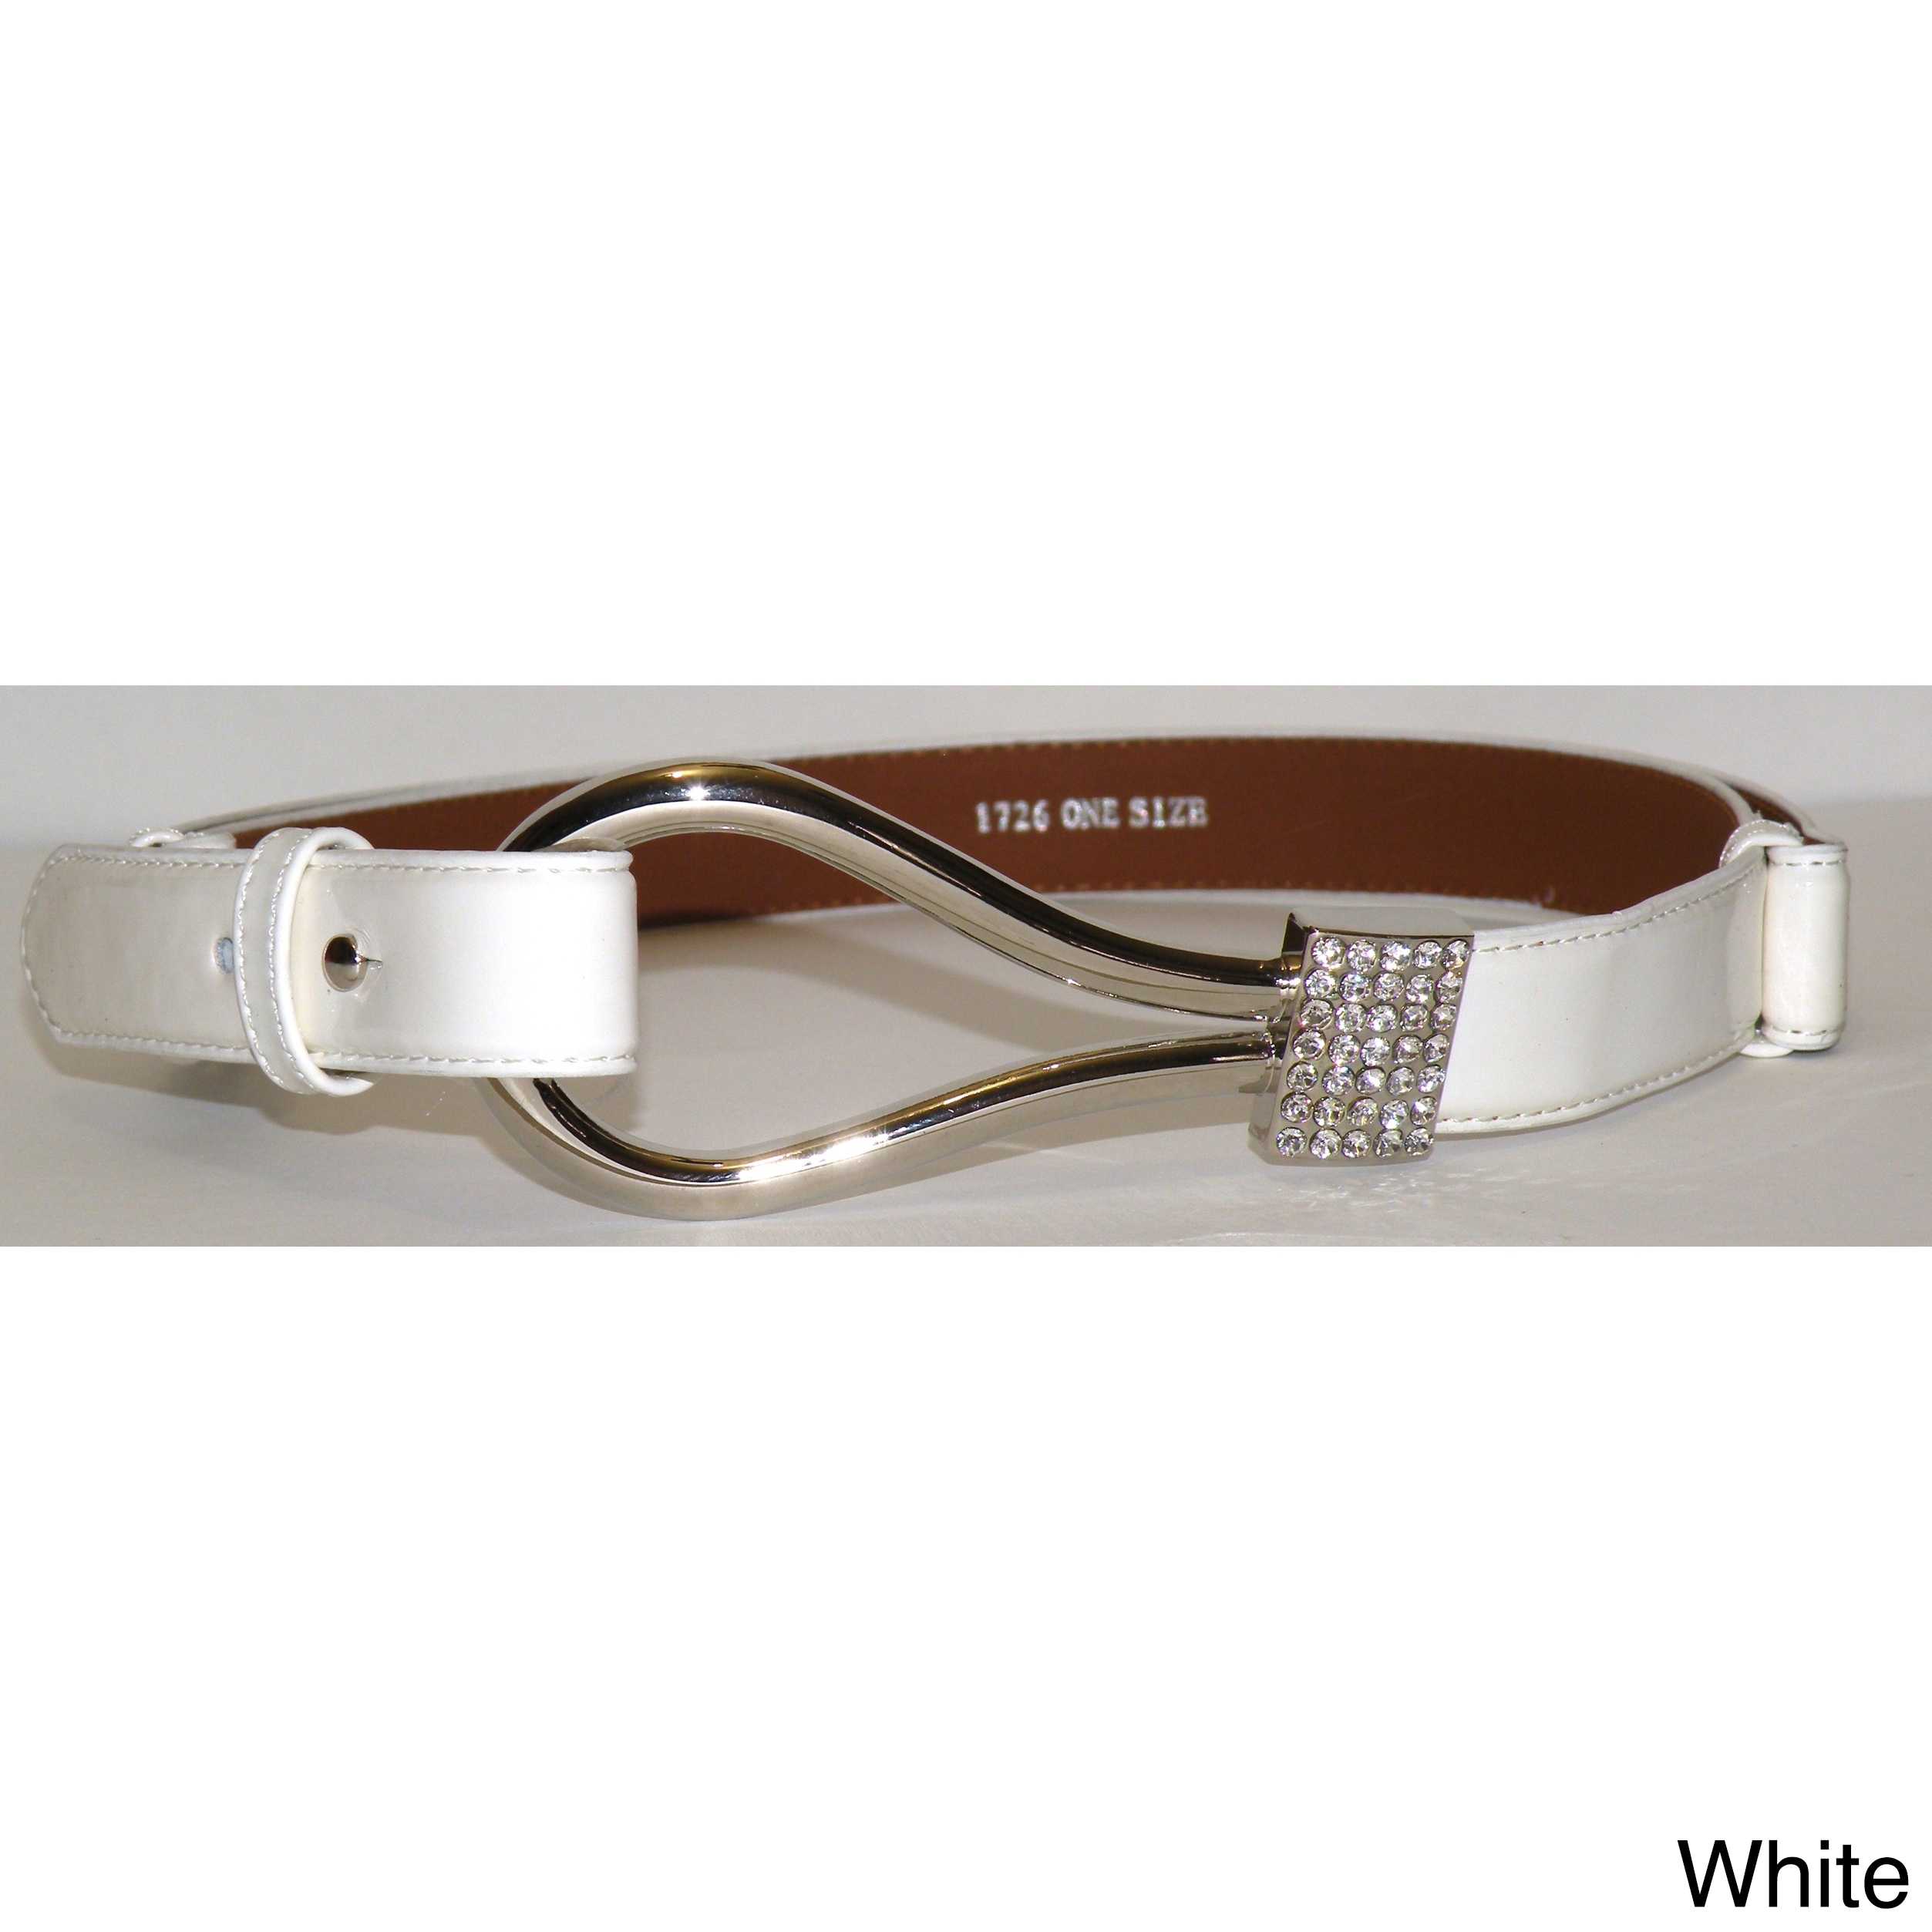 Womens Patent Leather Rhinestone Buckle Belt (Patent leatherClosure Metal BuckleHardware MetalApproximate width 1.5 inchesAdjustable to fit from a 22 inch to a 40 inch waist)